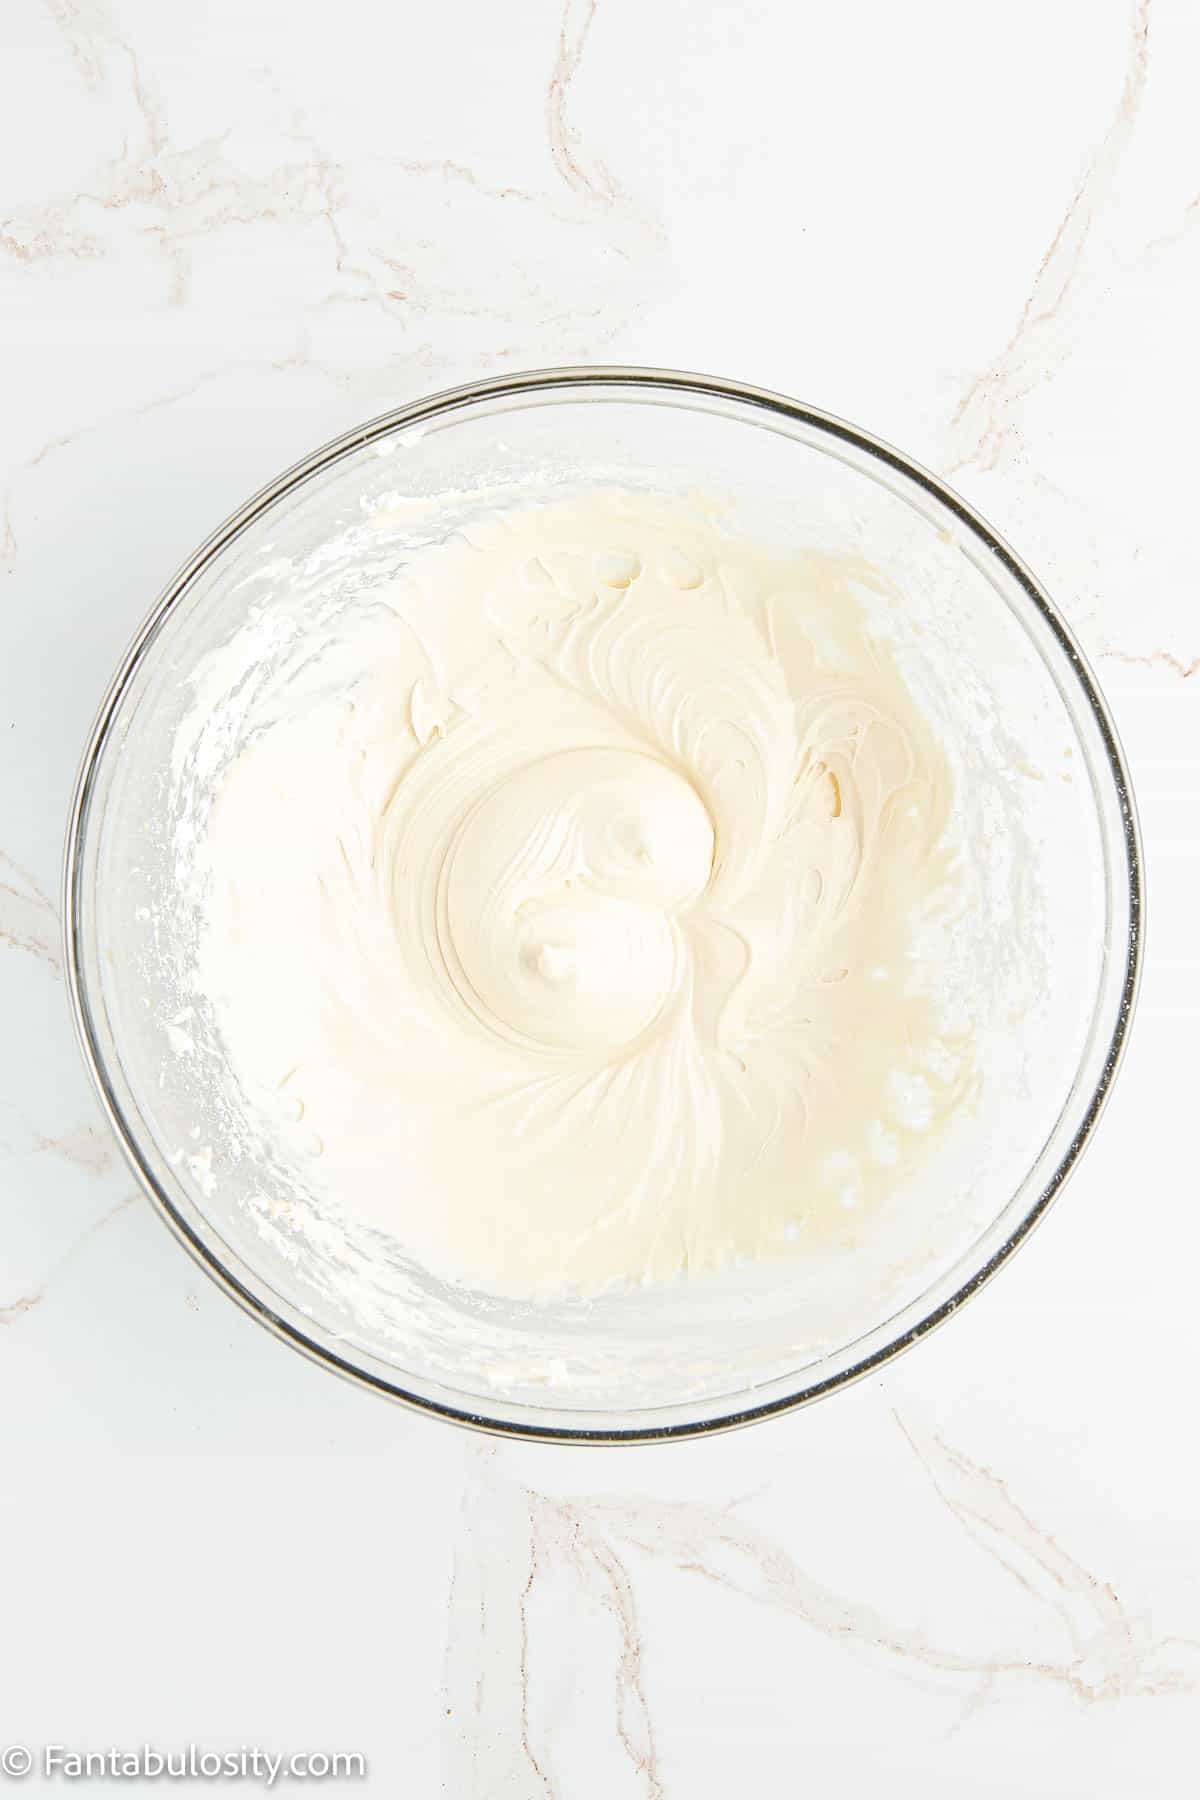 Mixed cream cheese mixture in glass bowl